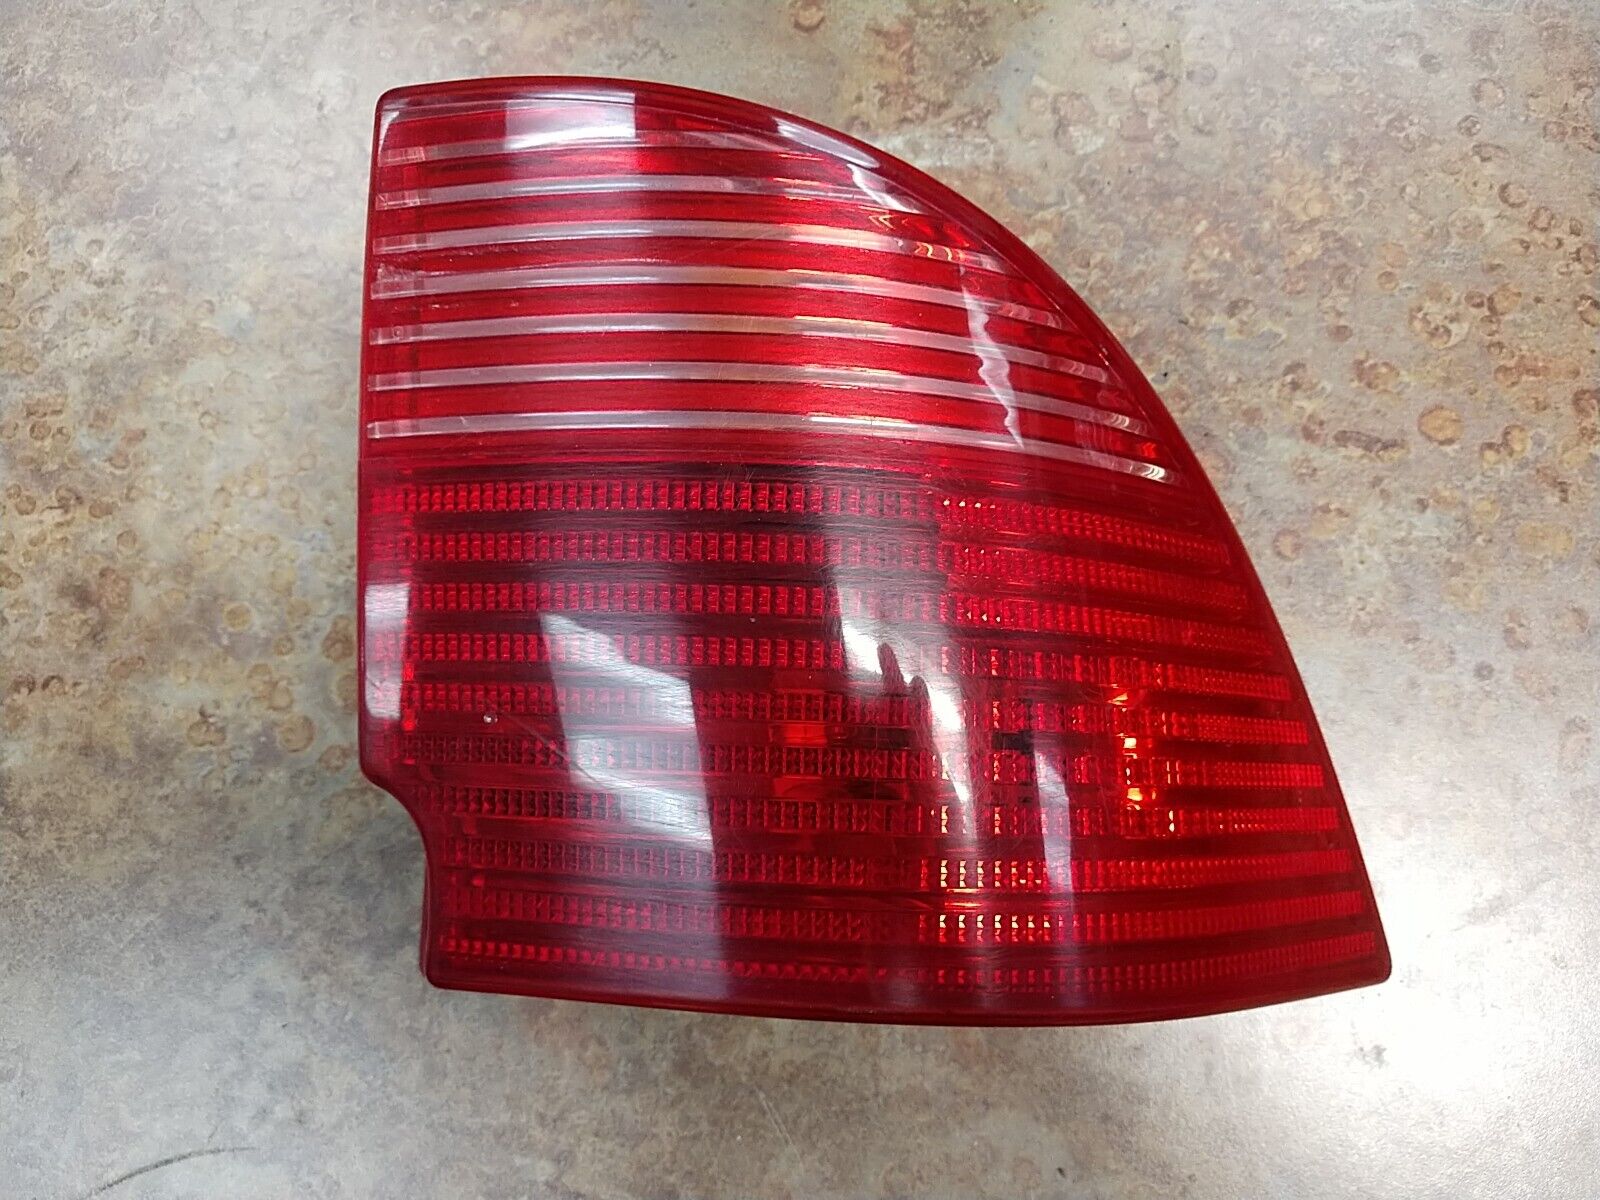 Used Saab 9-5 Wagon Passenger Right Taillight 12755798 Fits 2006 to 2009